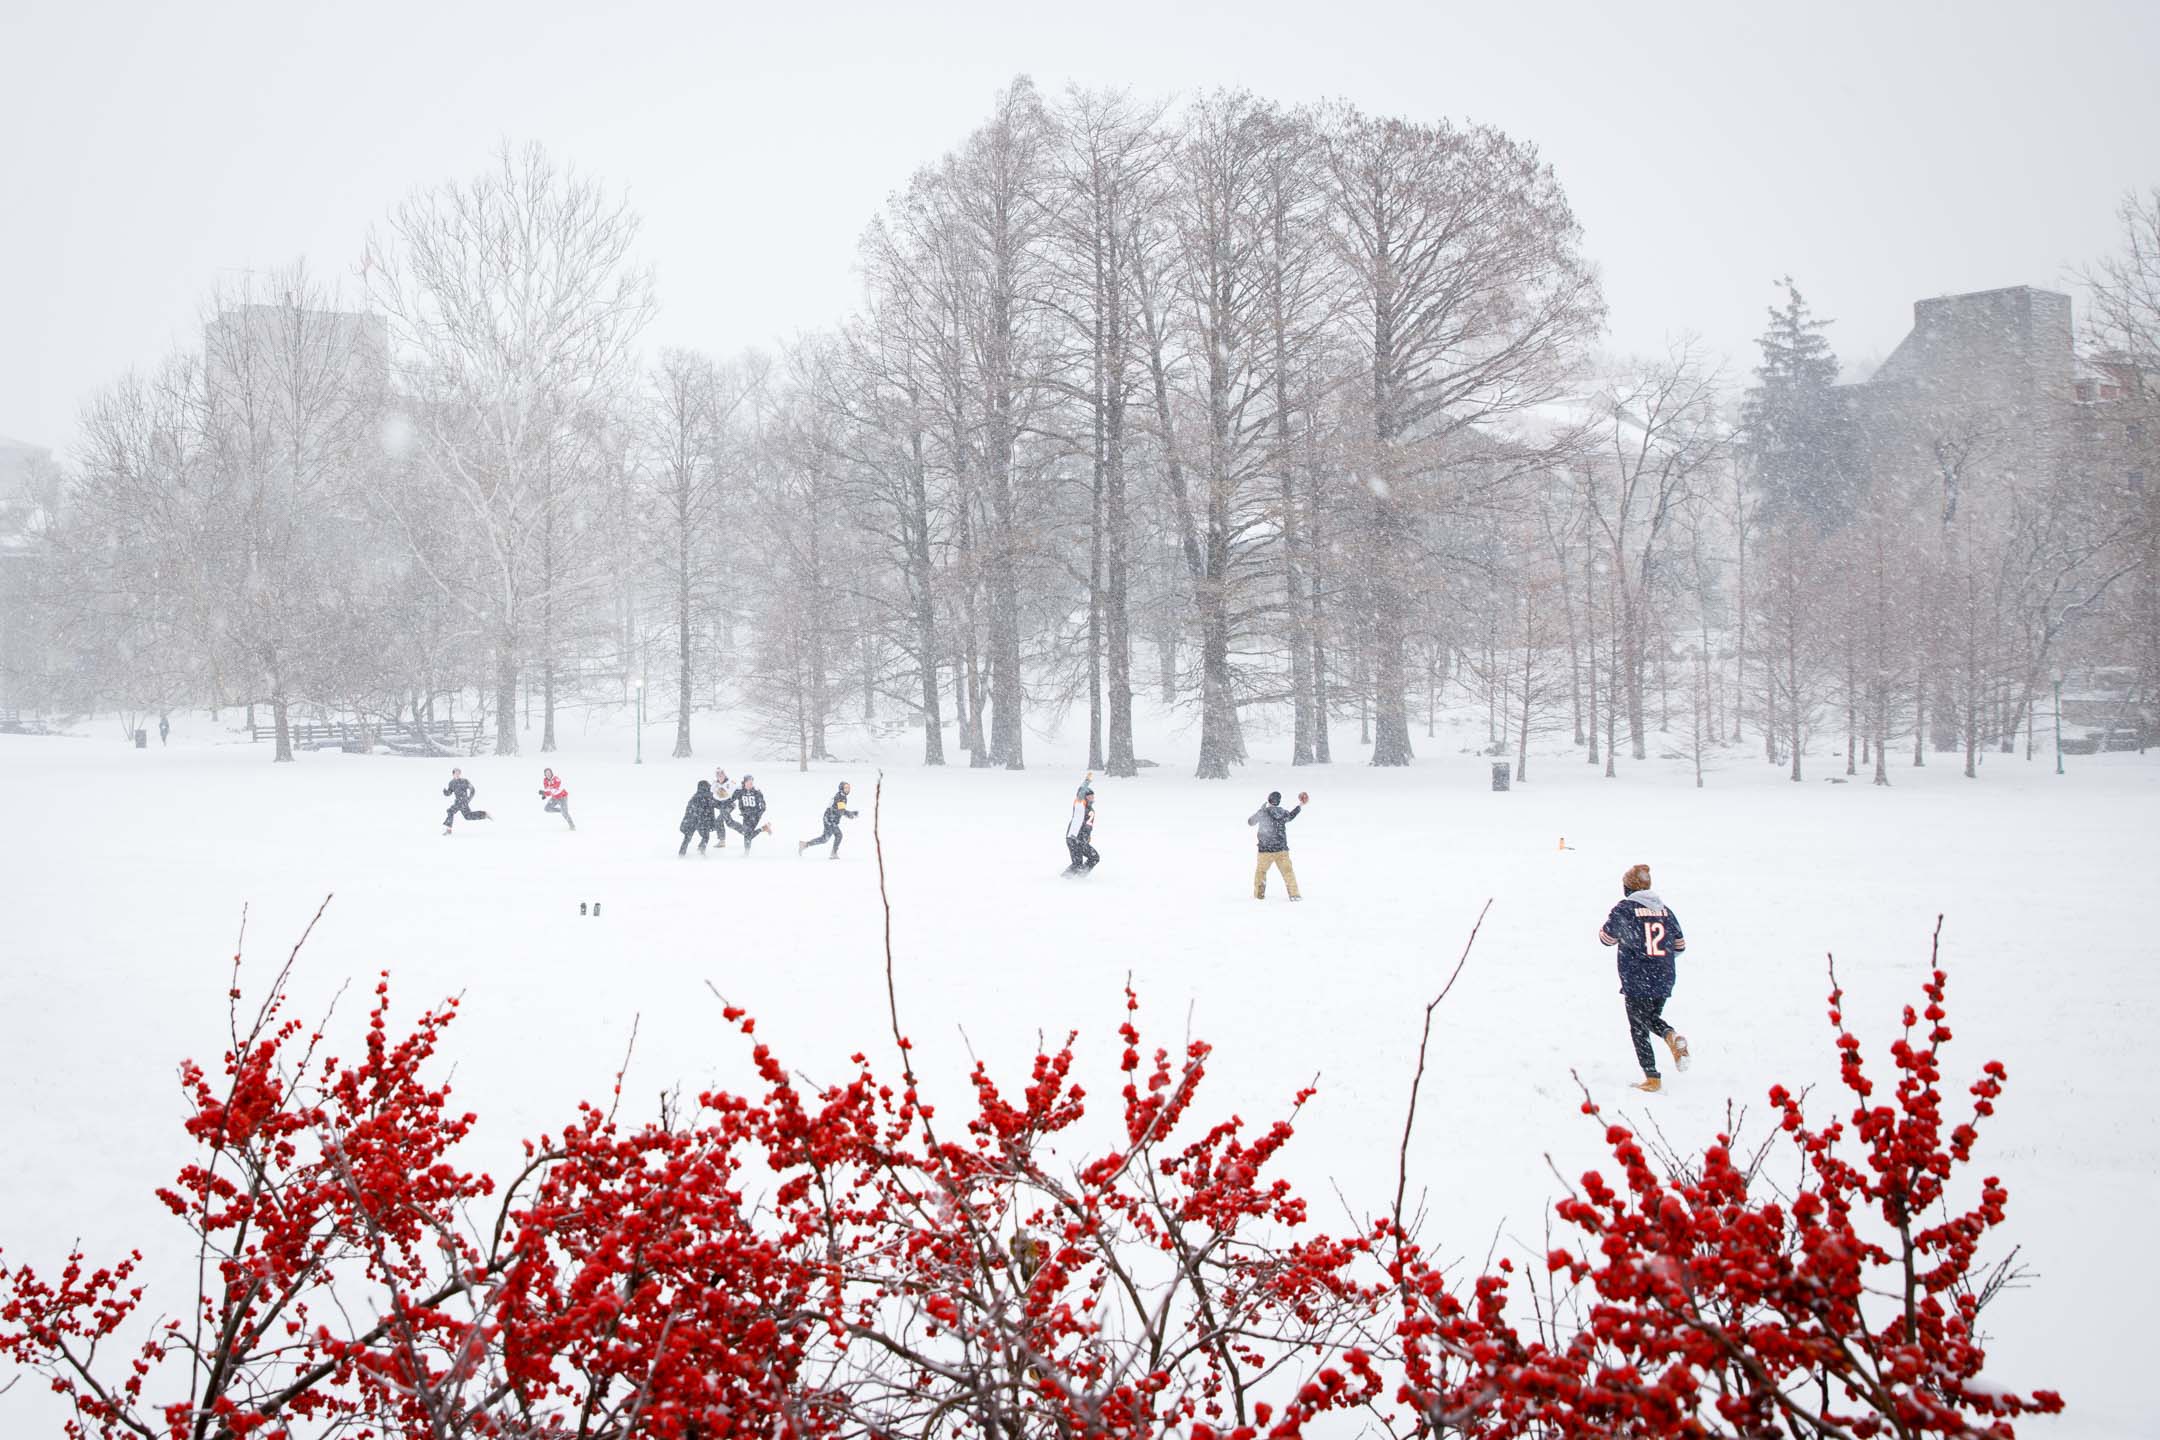 Students play football in the snow in Dunn Meadow at Indiana University Bloomington on Thursday, Feb. 3, 2022. (James Brosher/Indiana University)